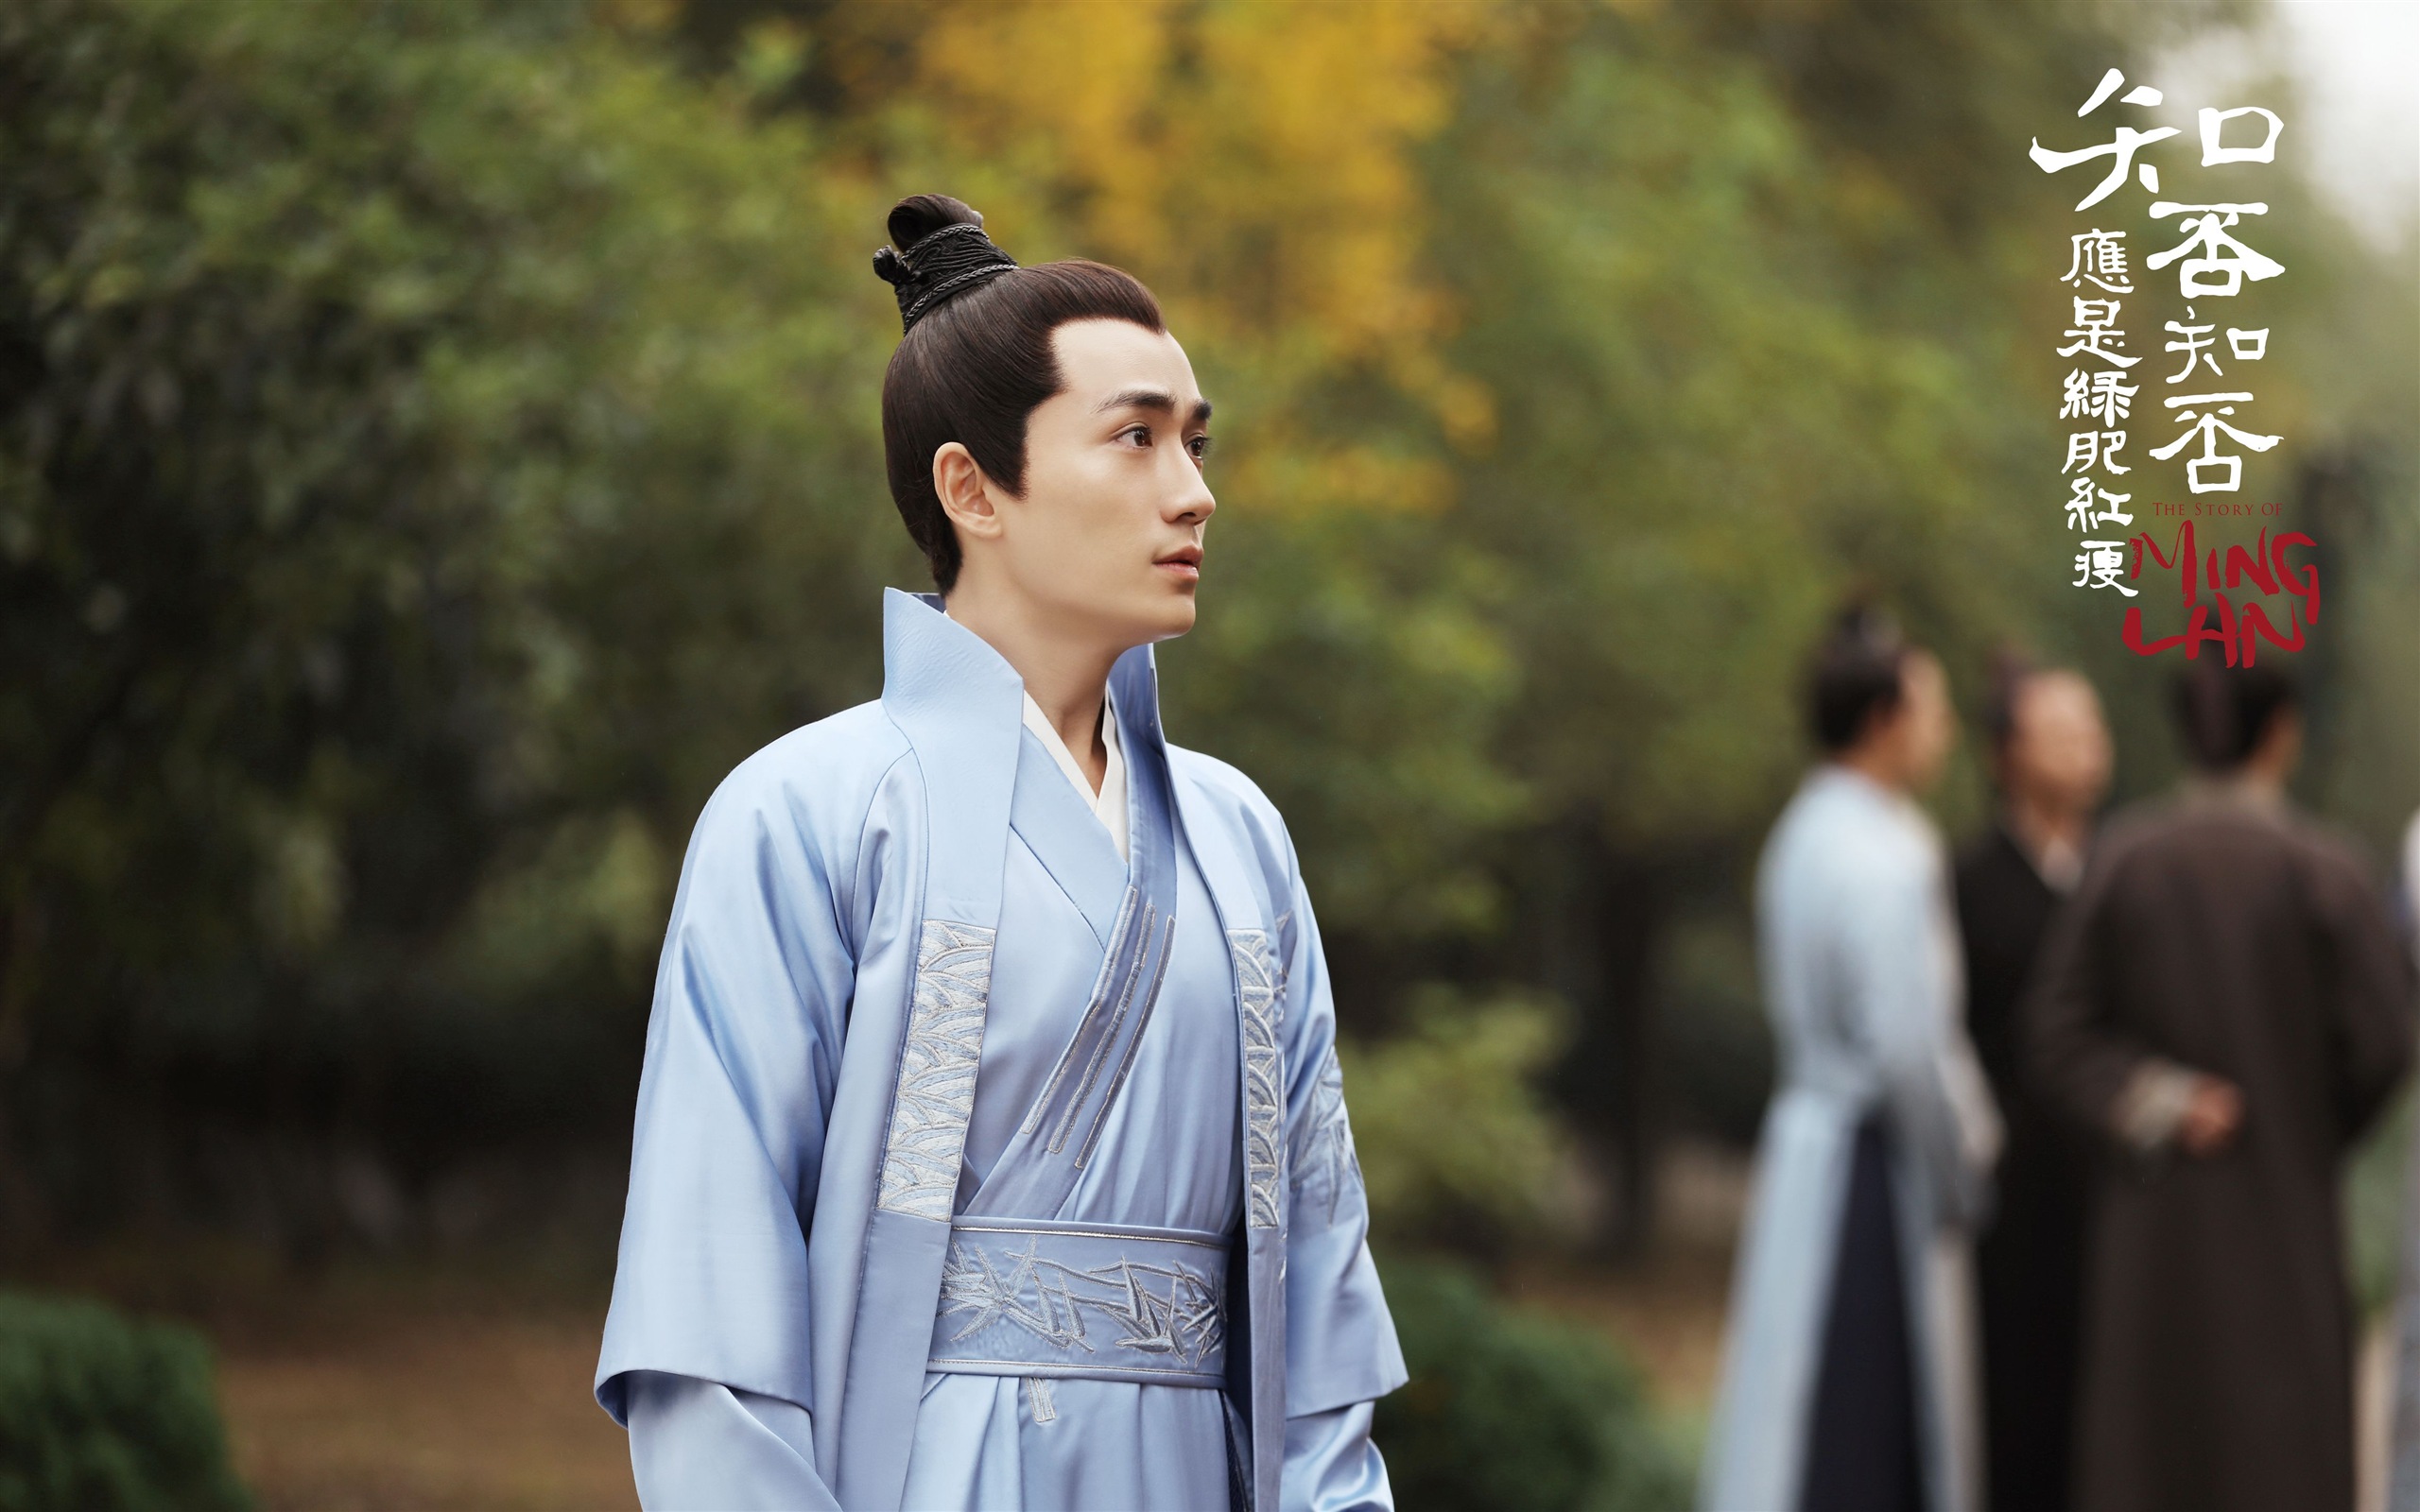 The Story Of MingLan, TV series HD wallpapers #55 - 2560x1600